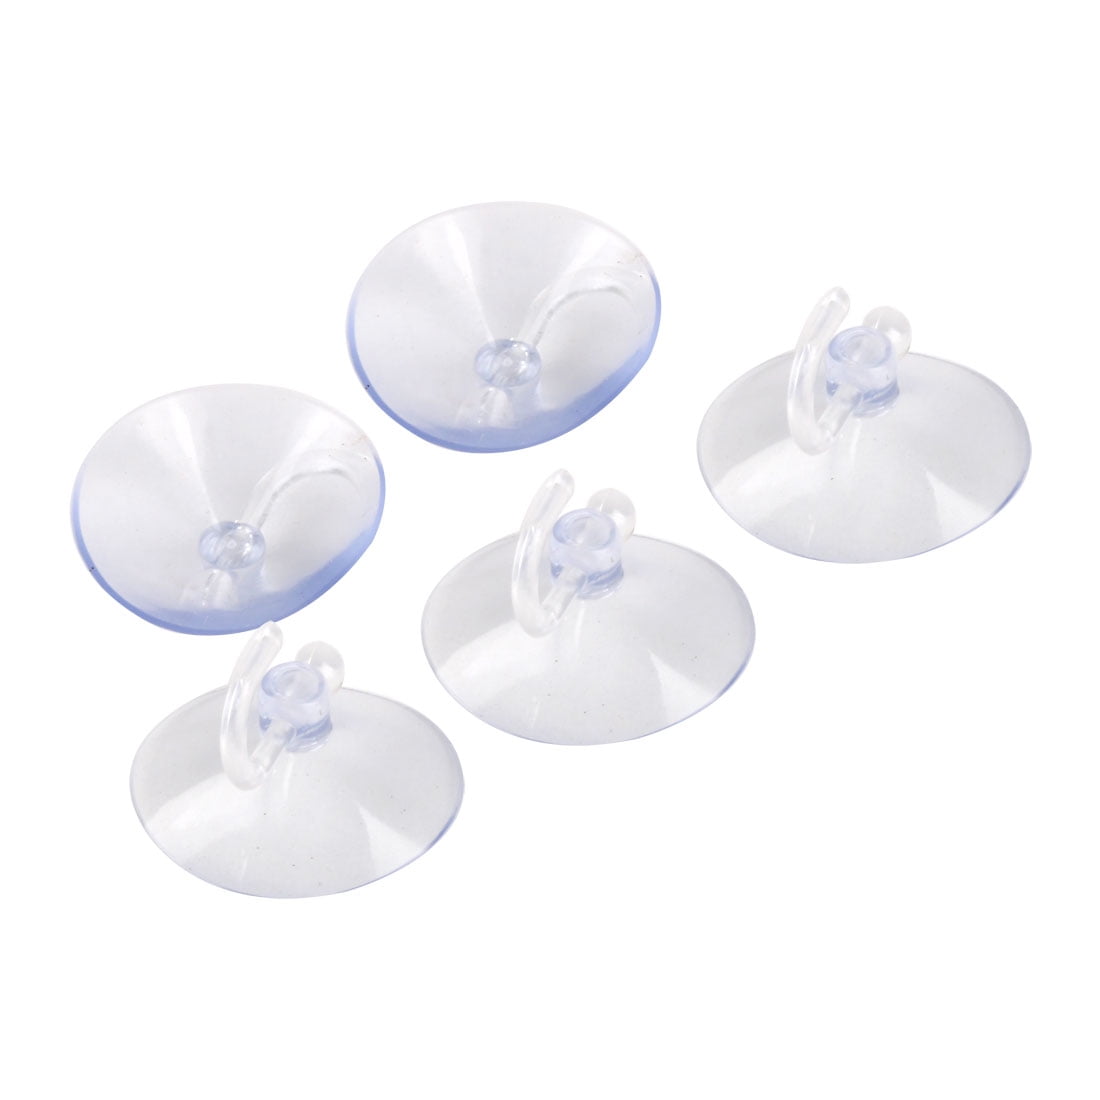 Ook 54402 Hook Suction Cup Med Clear Pk6 for sale online 